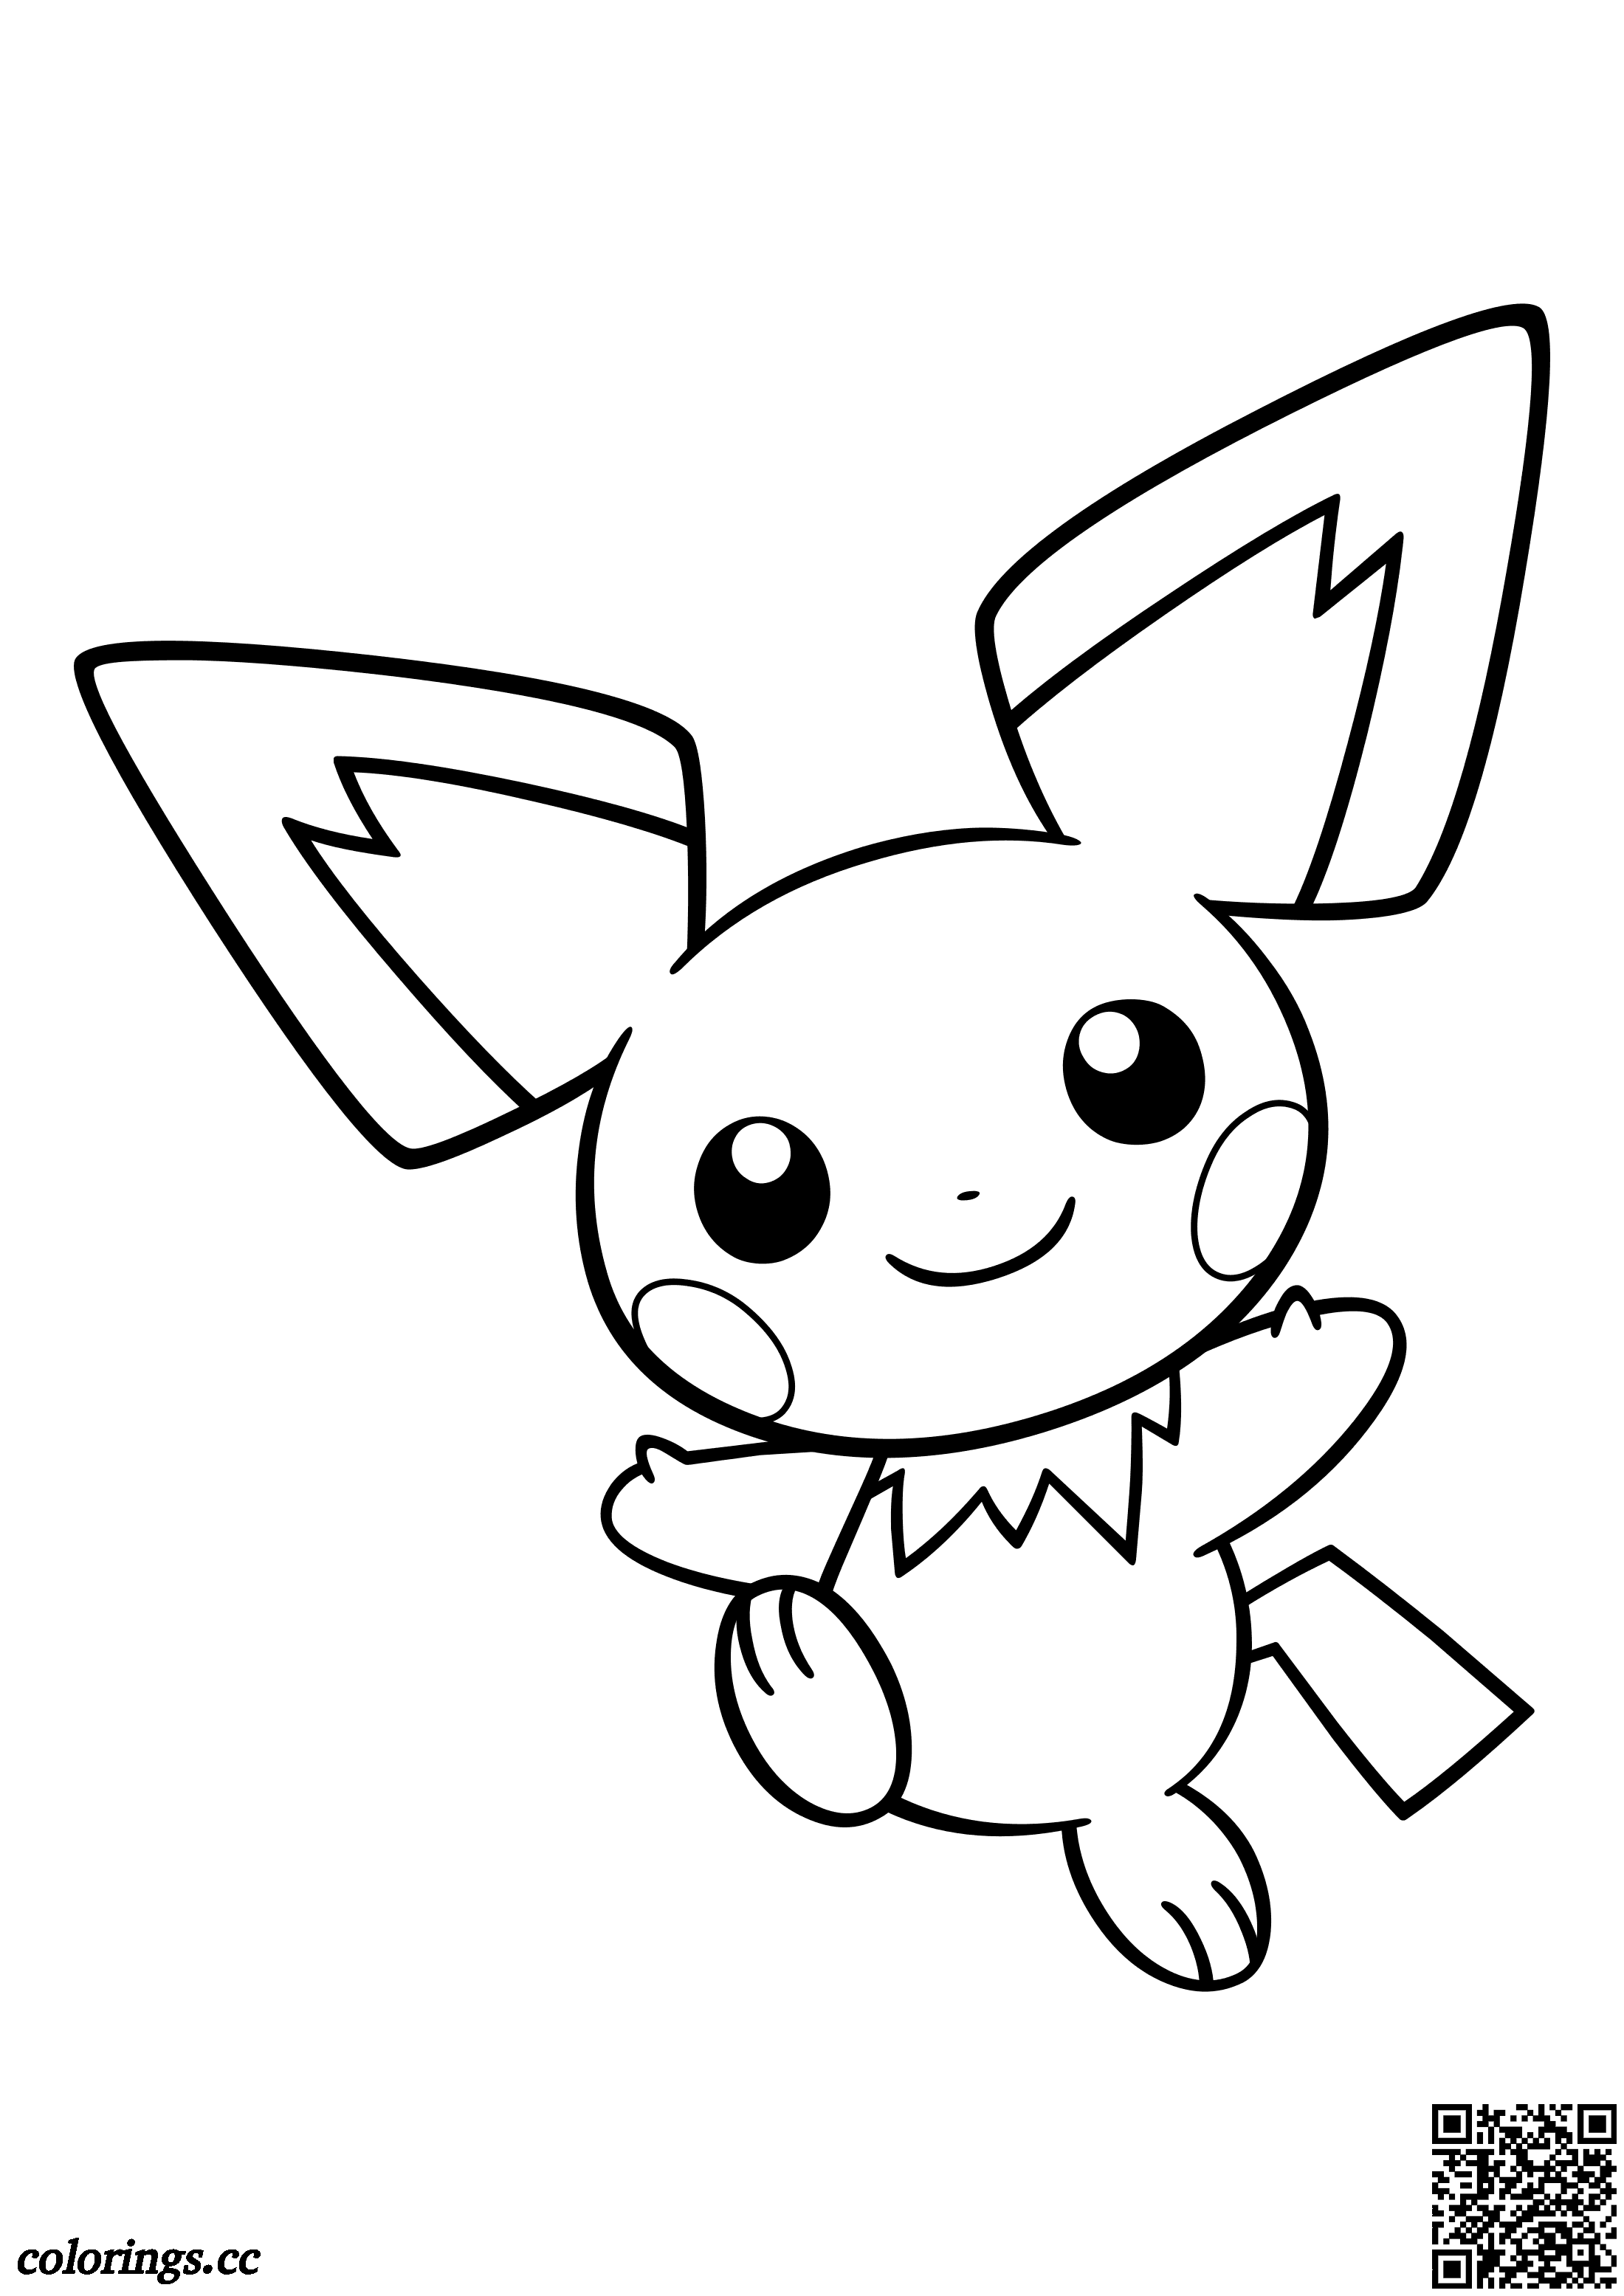 172 Pichu coloring pages, Pokemon coloring pages Colorings.cc